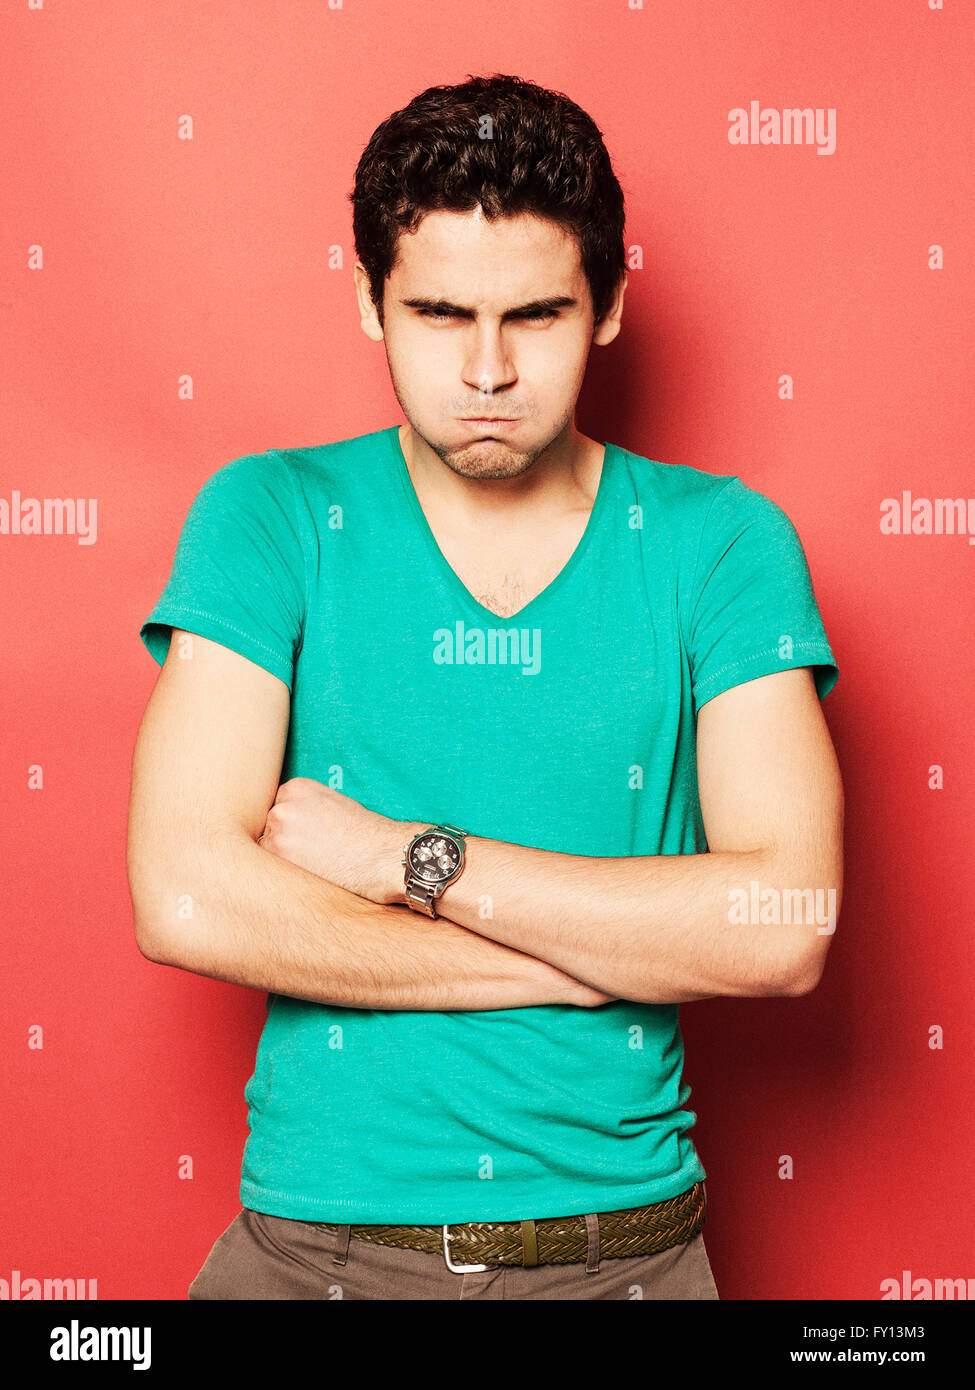 Portrait of angry young man with puffed cheeks standing arms crossed against red background Stock Photo